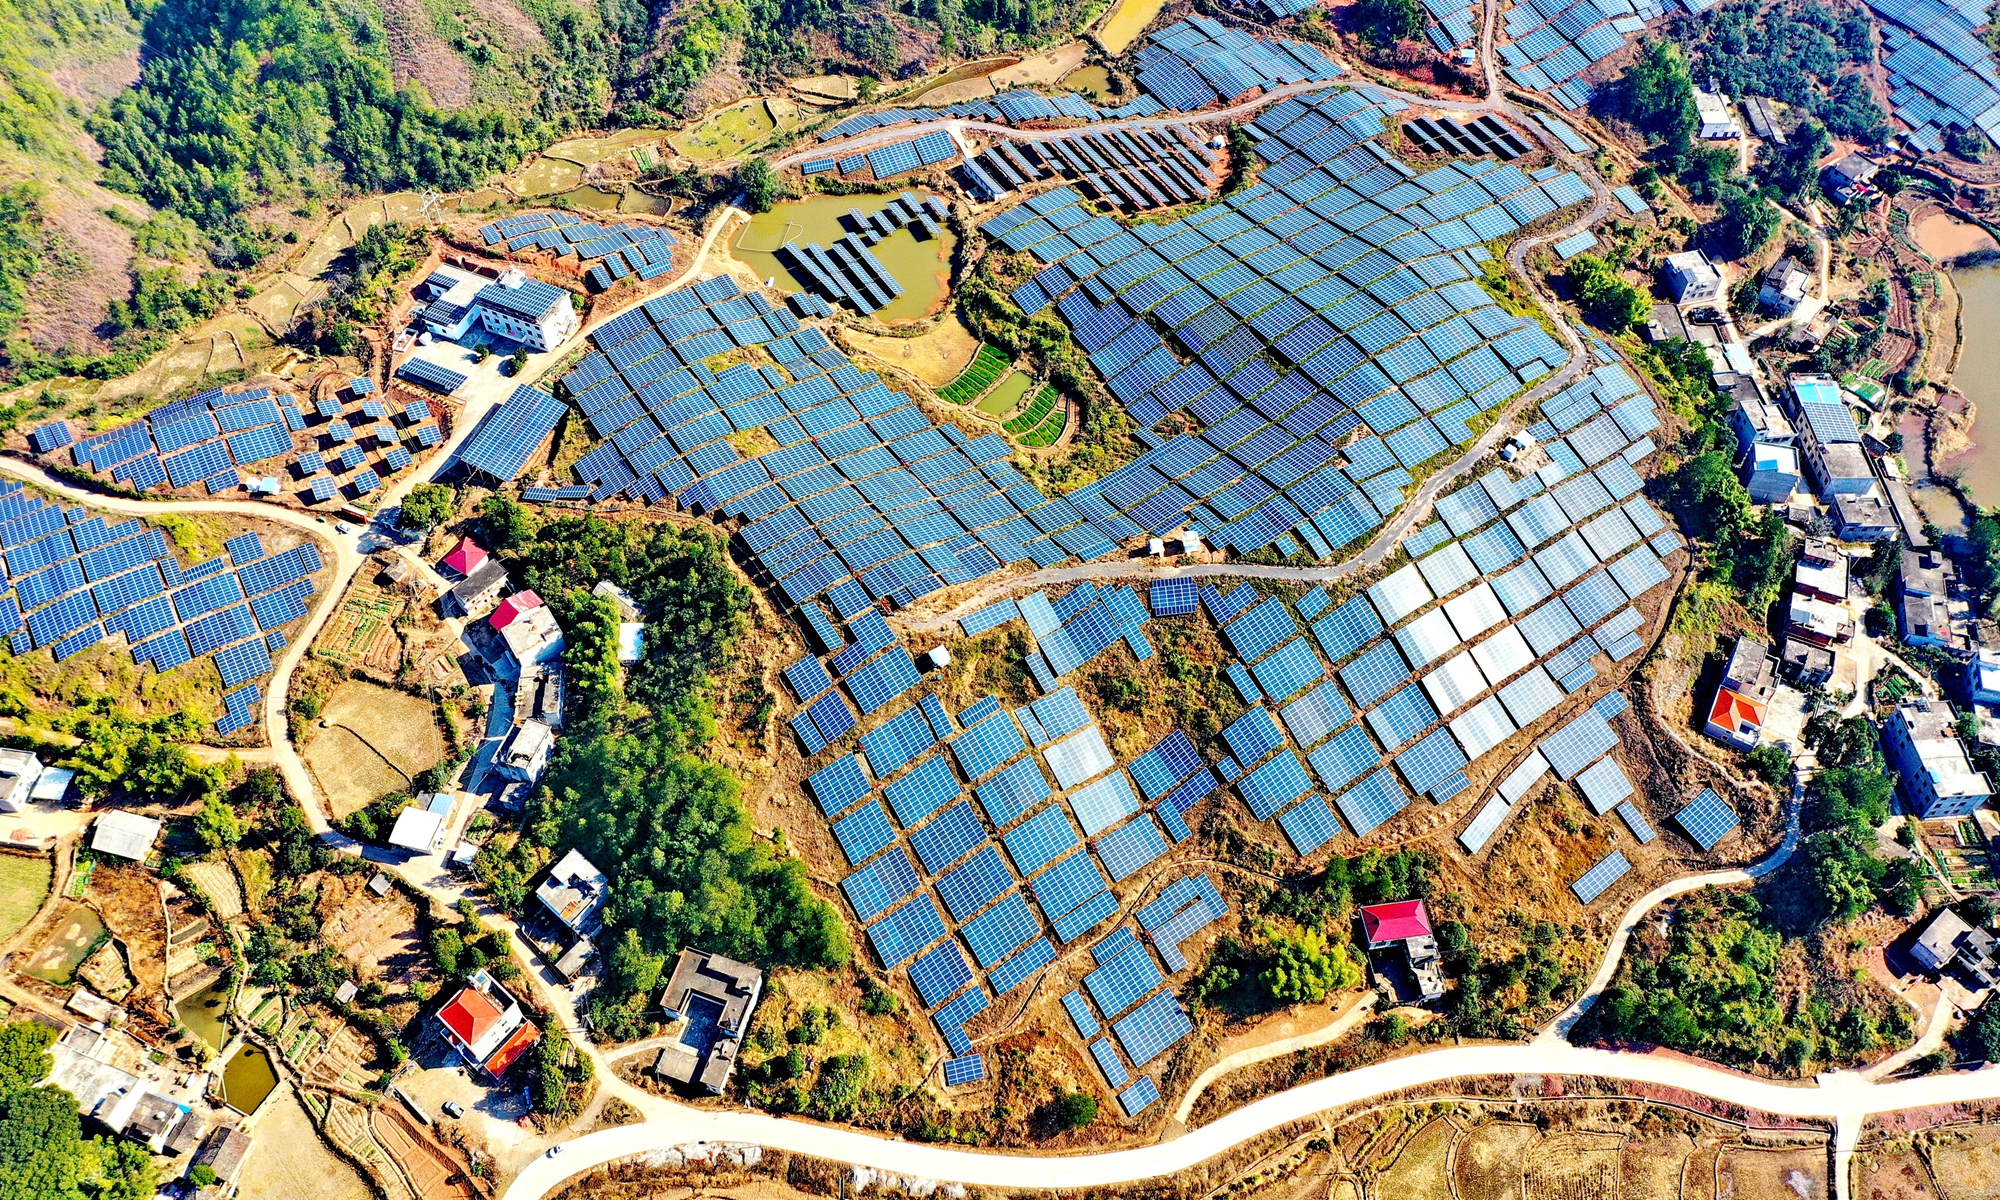 A panoramic view of a solar panel field in Huichang, East China’s Jiangxi Province on Monday. Local government in recent years has developed several solar panel plus poverty alleviation projects, which have increased people’s incomes and provided more jobs. Photo: CNSphoto